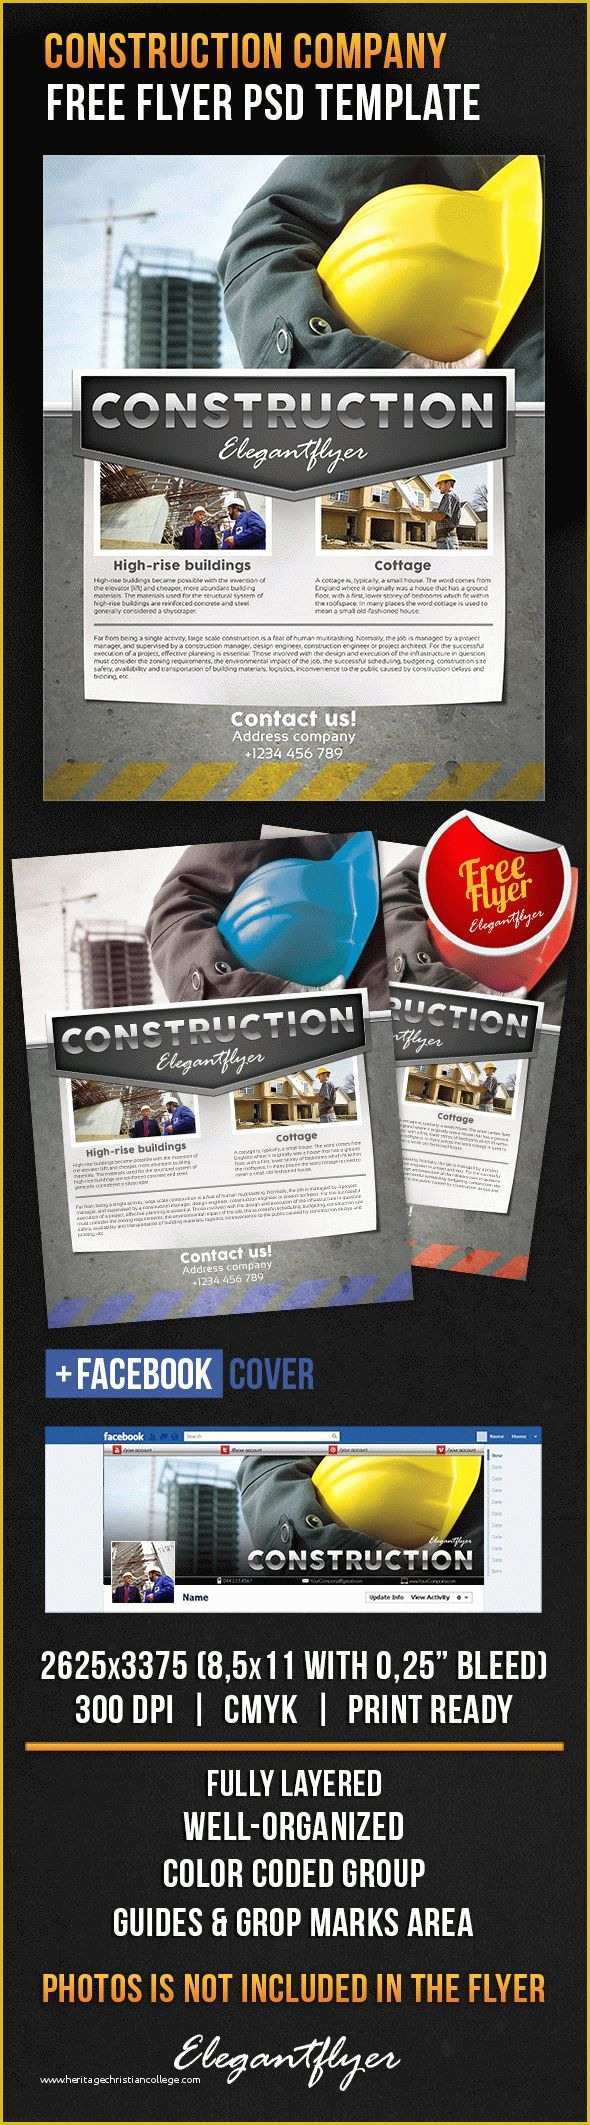 Construction Company Template Free Of Construction Pany – Free Flyer Psd Template – by